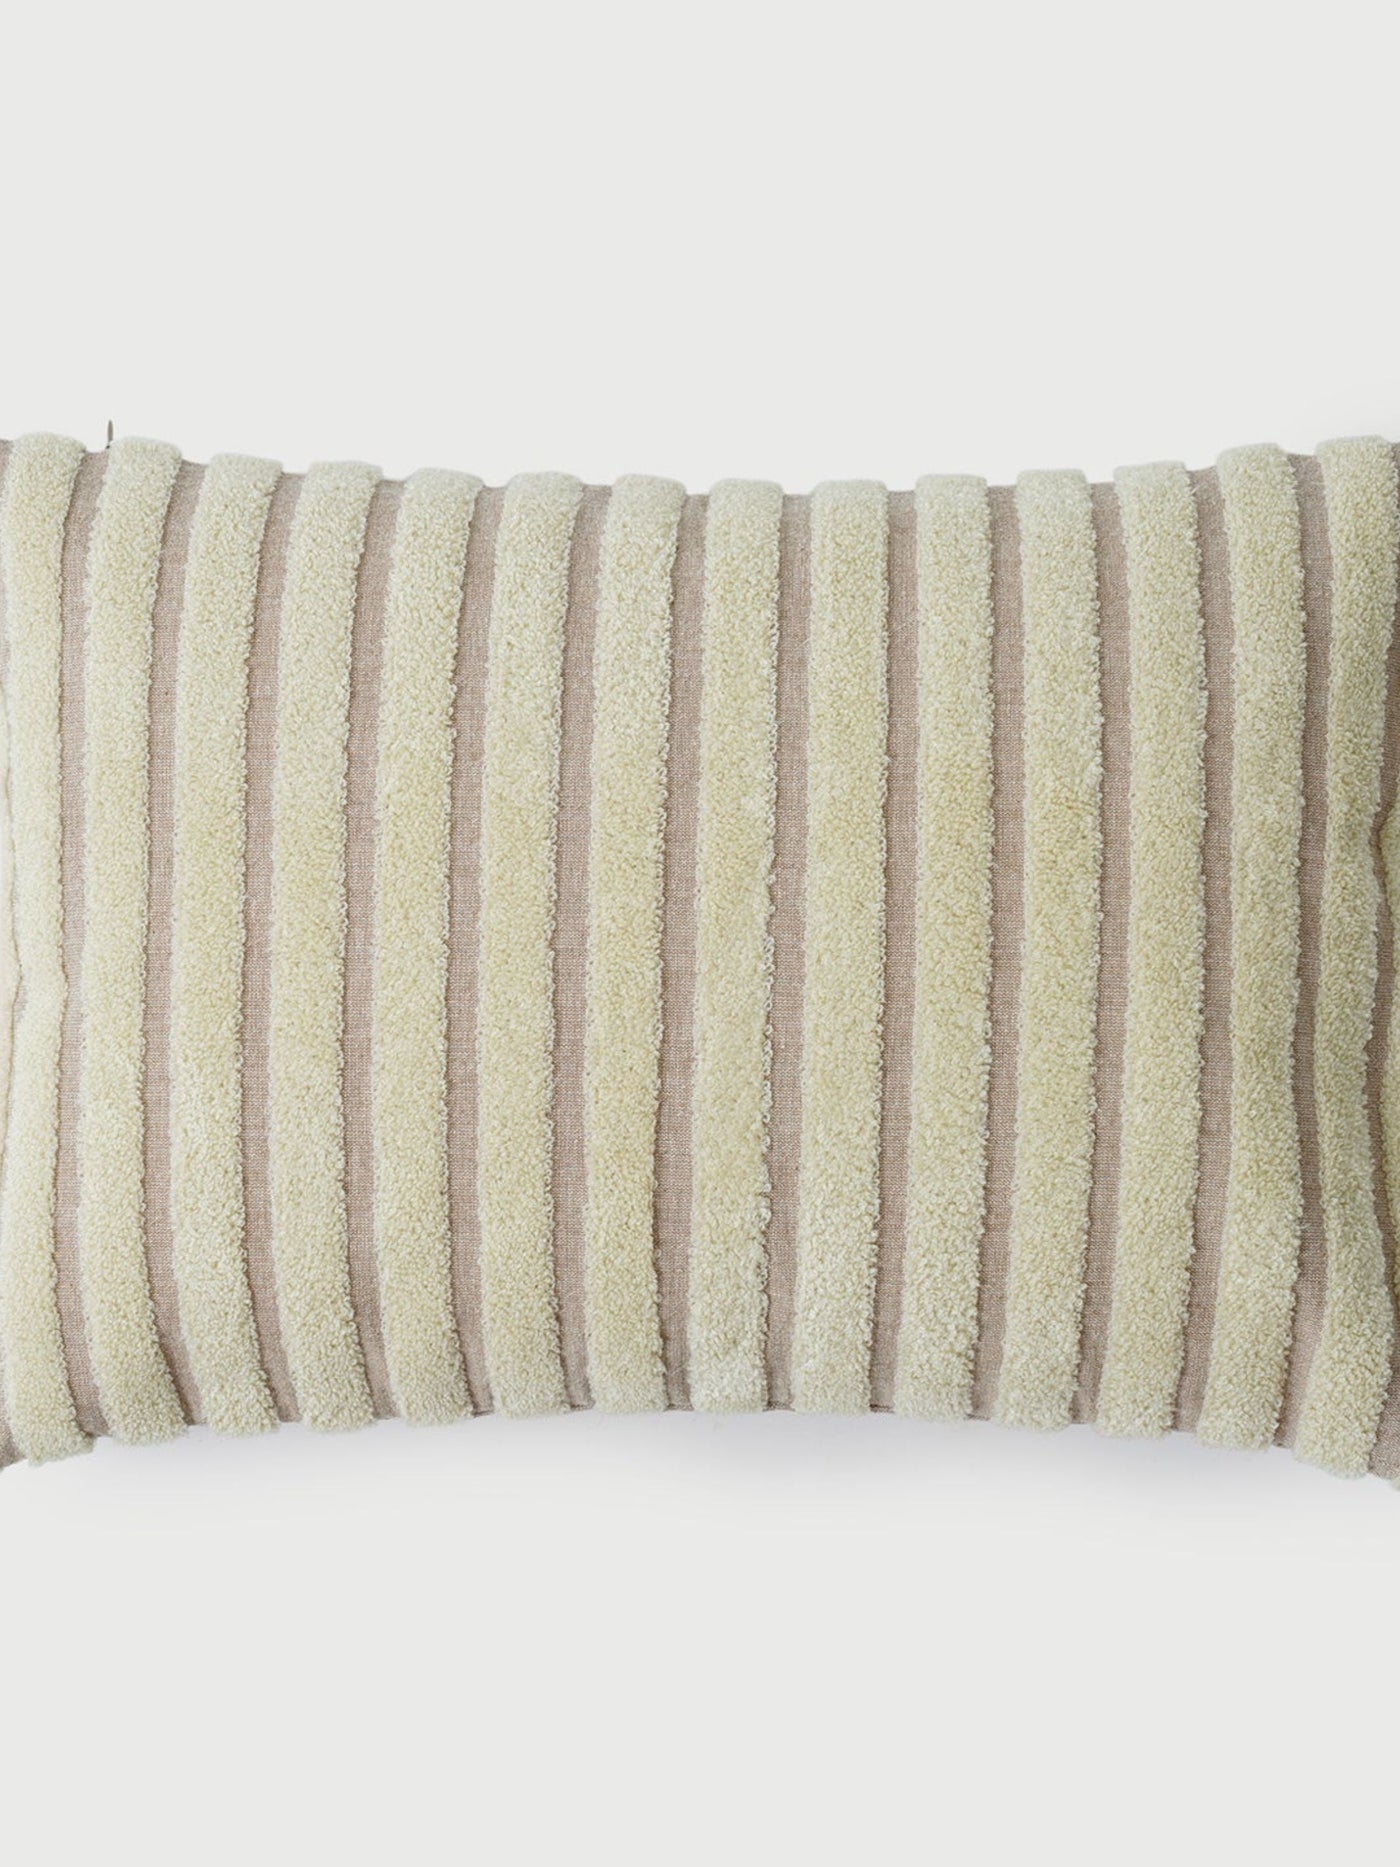 Cushion Cover - Striped Ivory Oblong